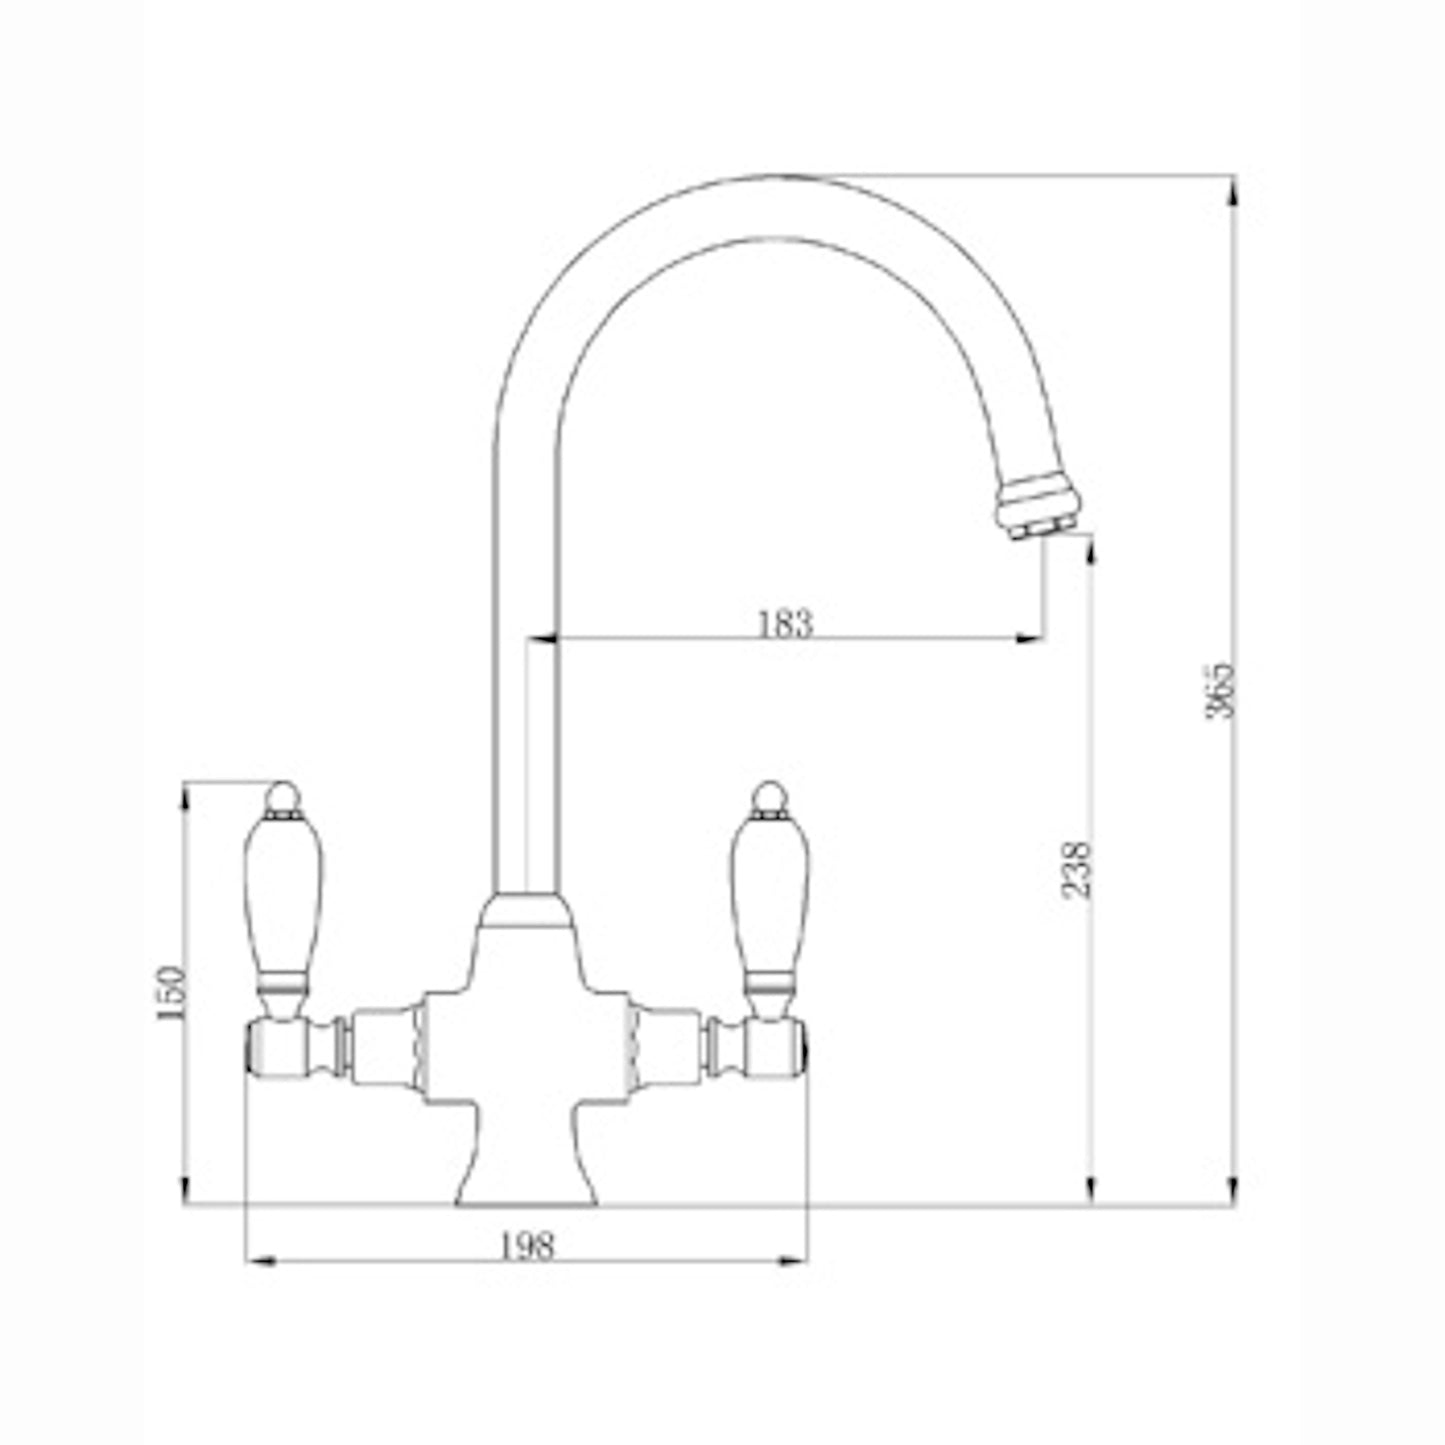 Dorchester Georgian dual flow kitchen sink tap with twin white levers - brushed nickel